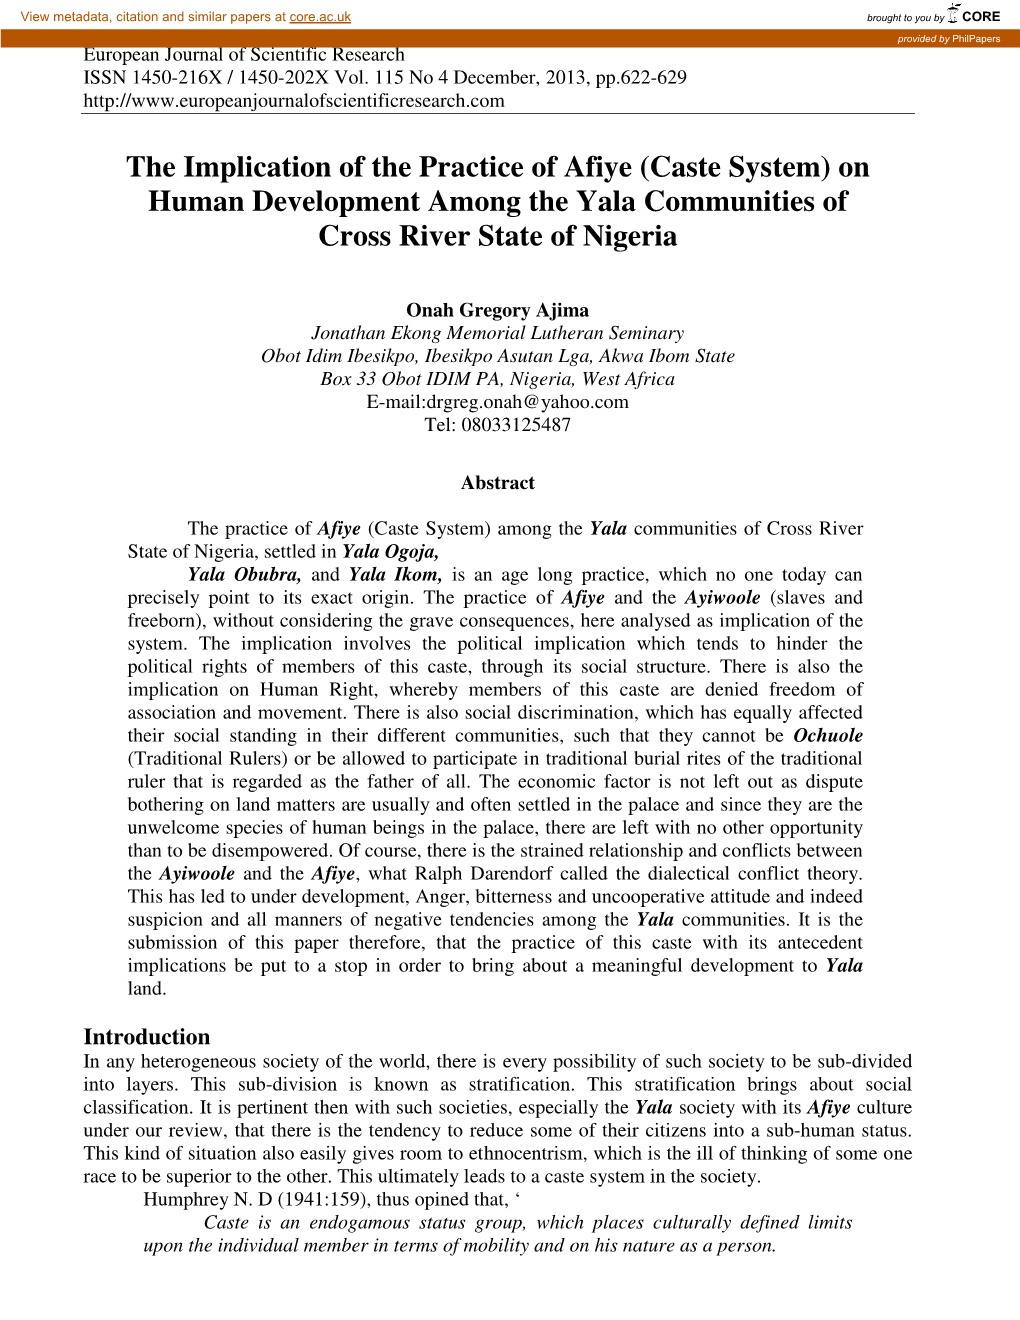 The Implication of the Practice of Afiye (Caste System) on Human Development Among the Yala Communities of Cross River State of Nigeria